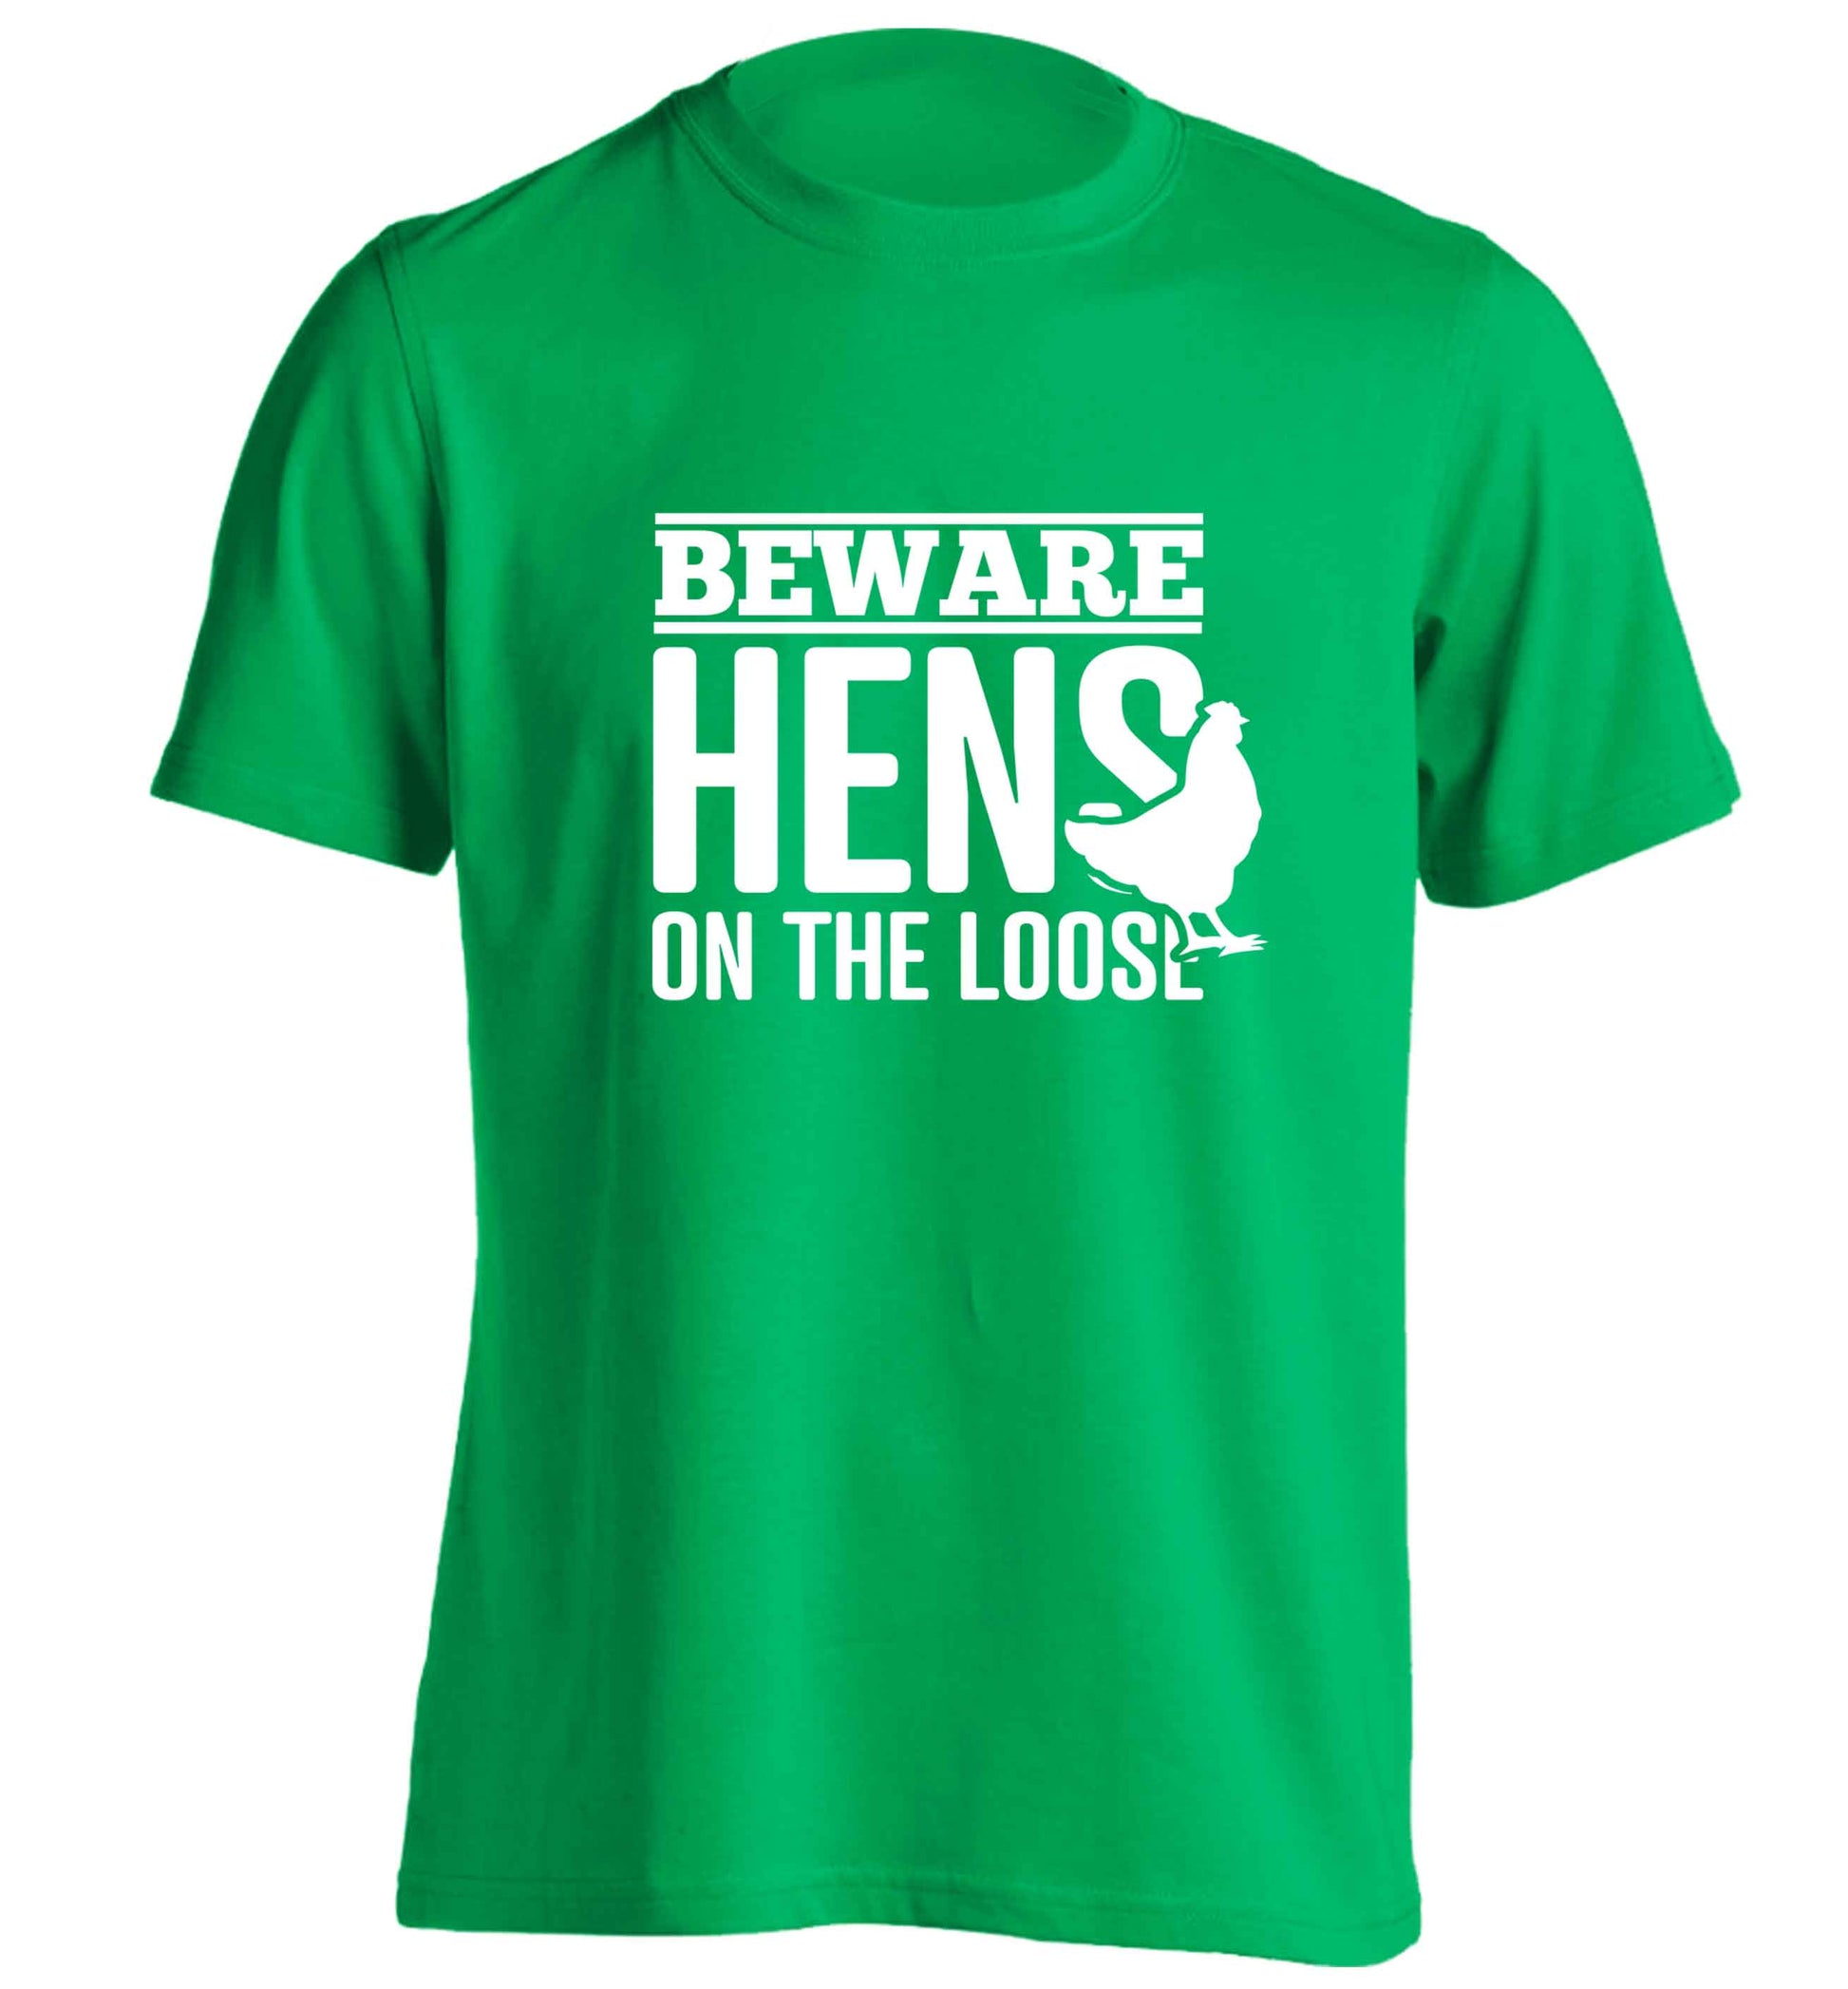 Beware hens on the loose adults unisex green Tshirt 2XL